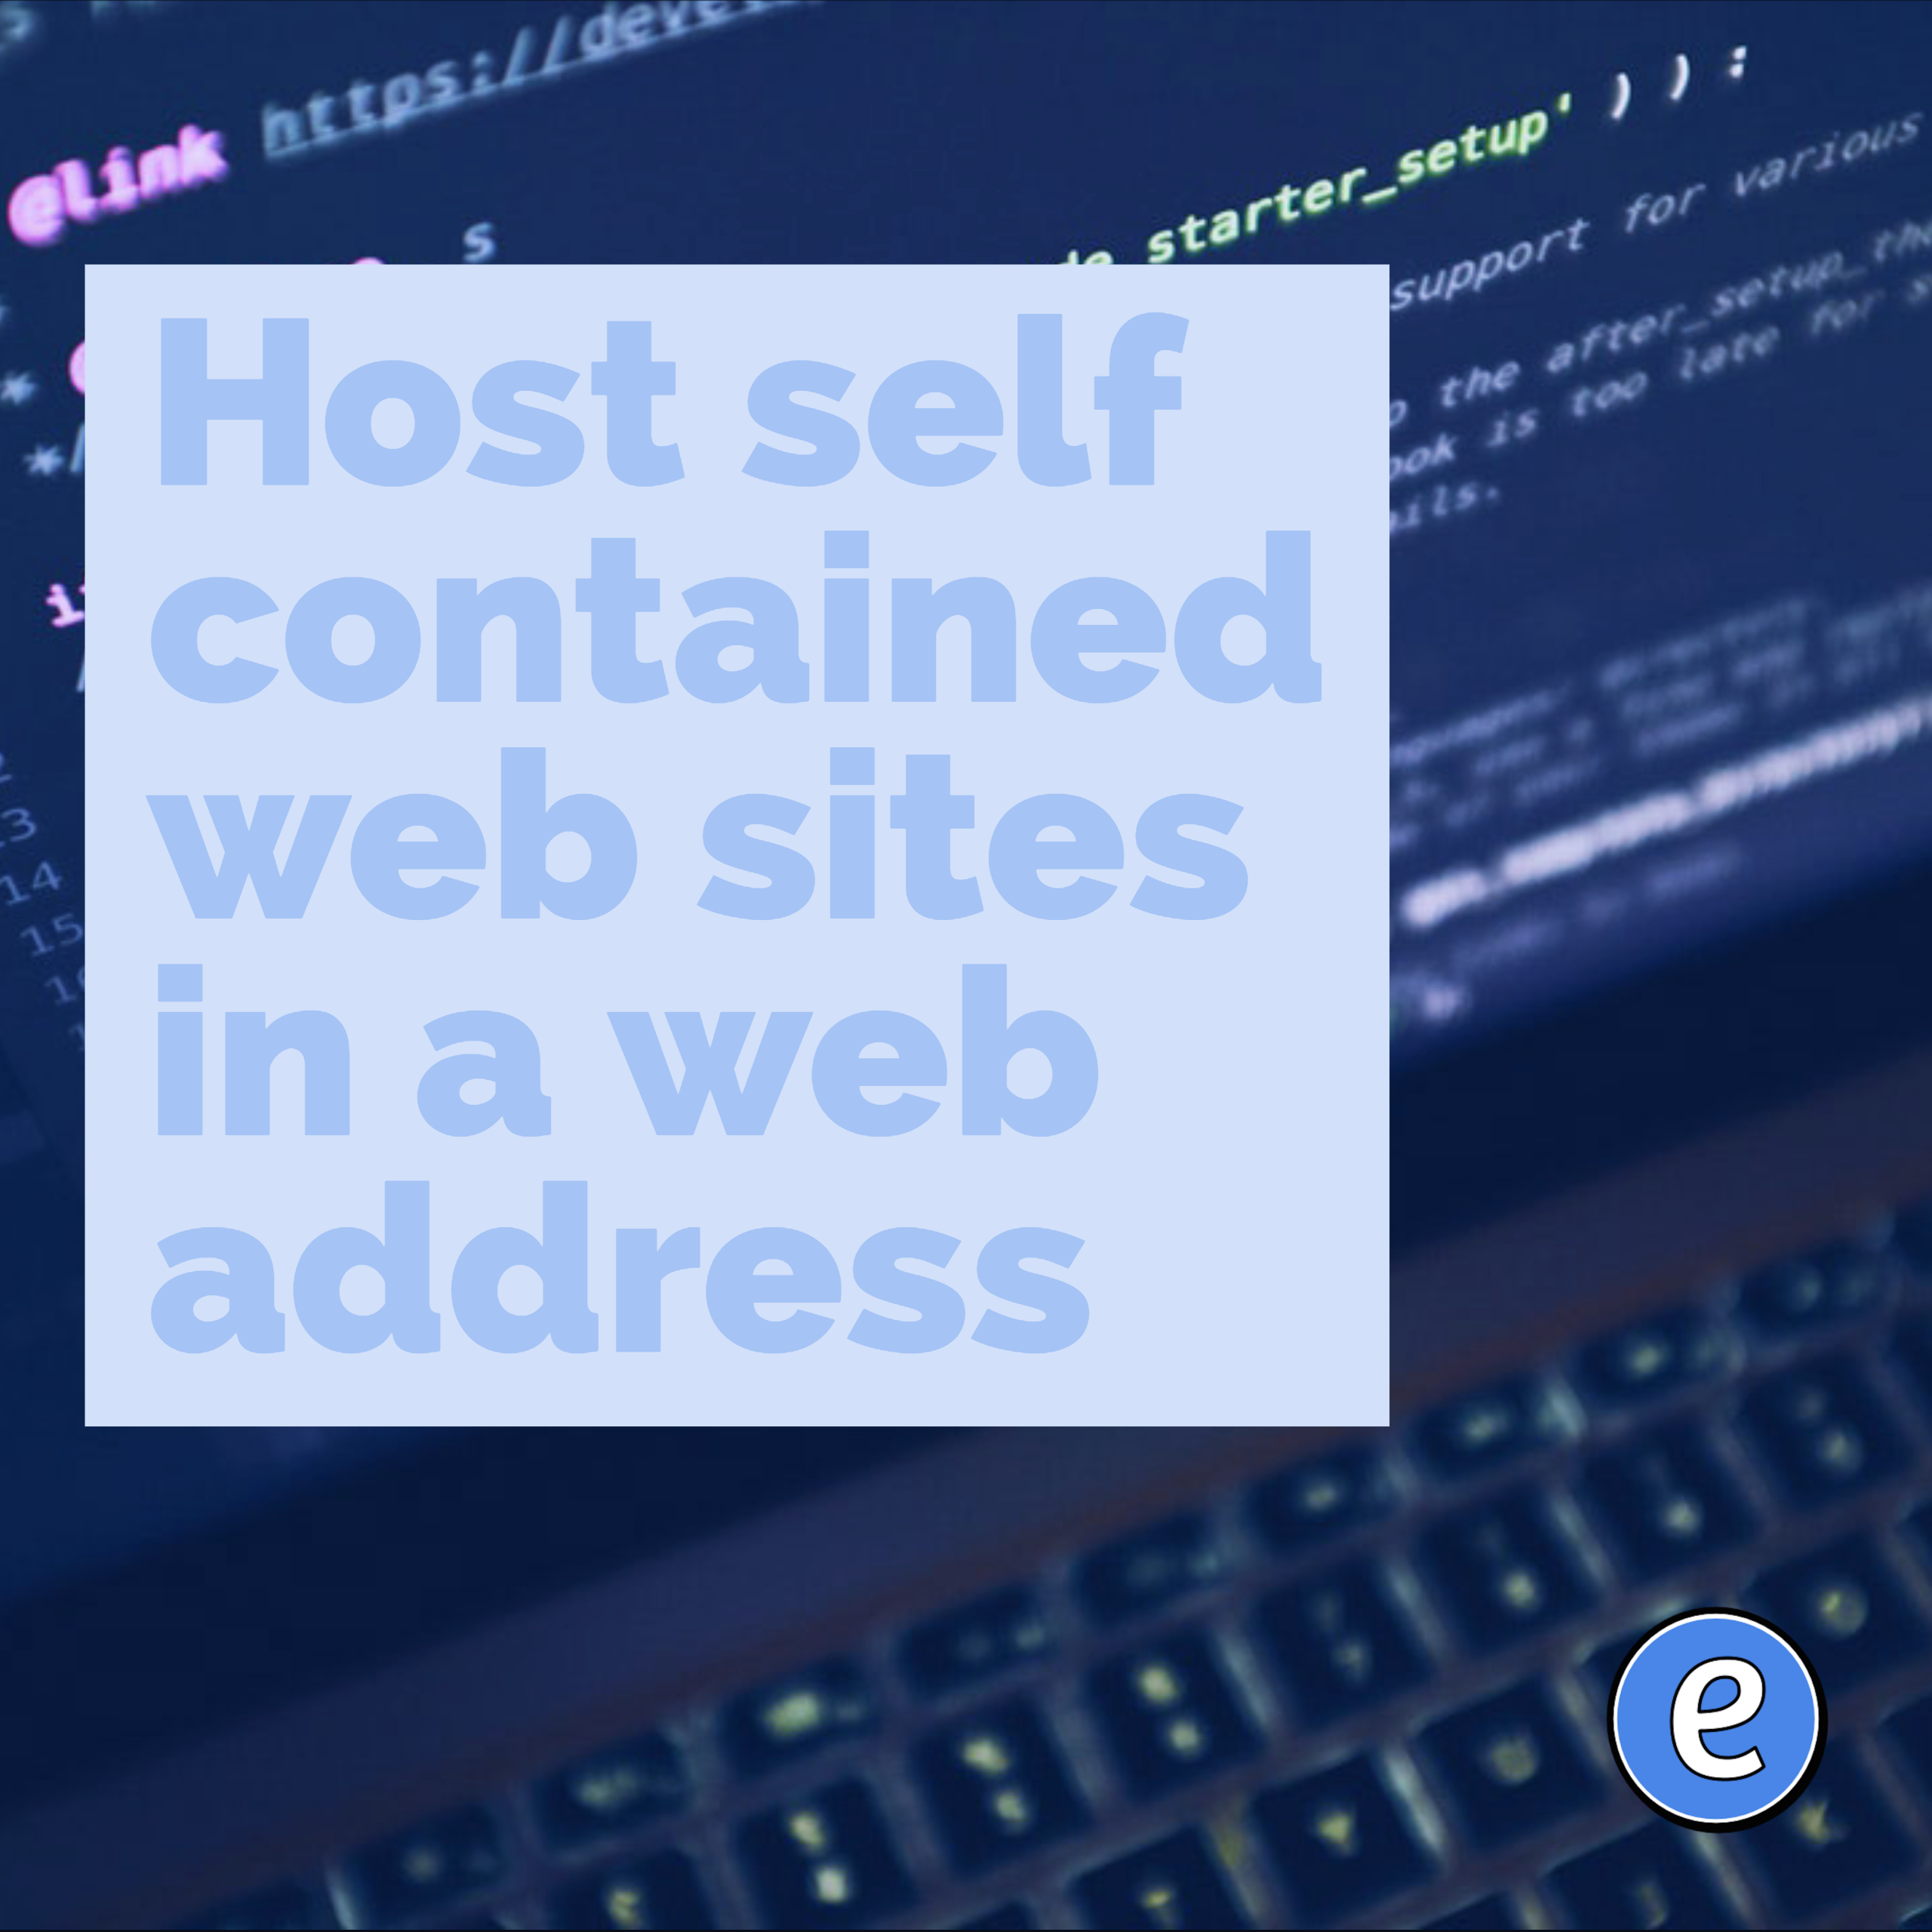 Host self contained web sites in a web address